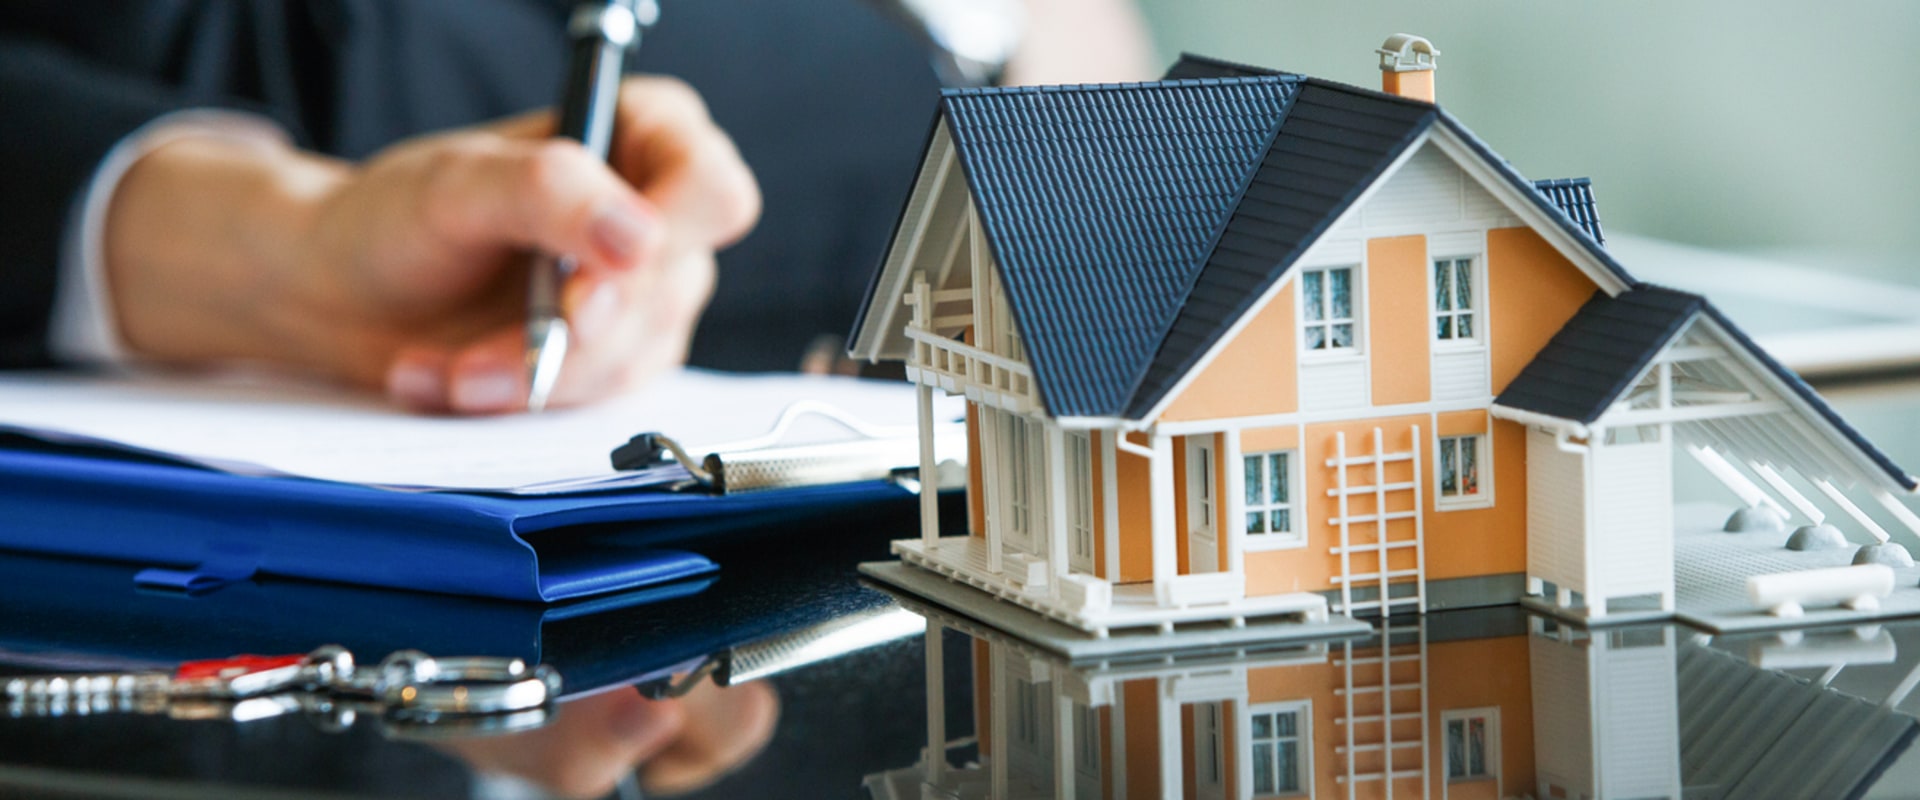 How to Set Realistic Property Management Goals and Objectives